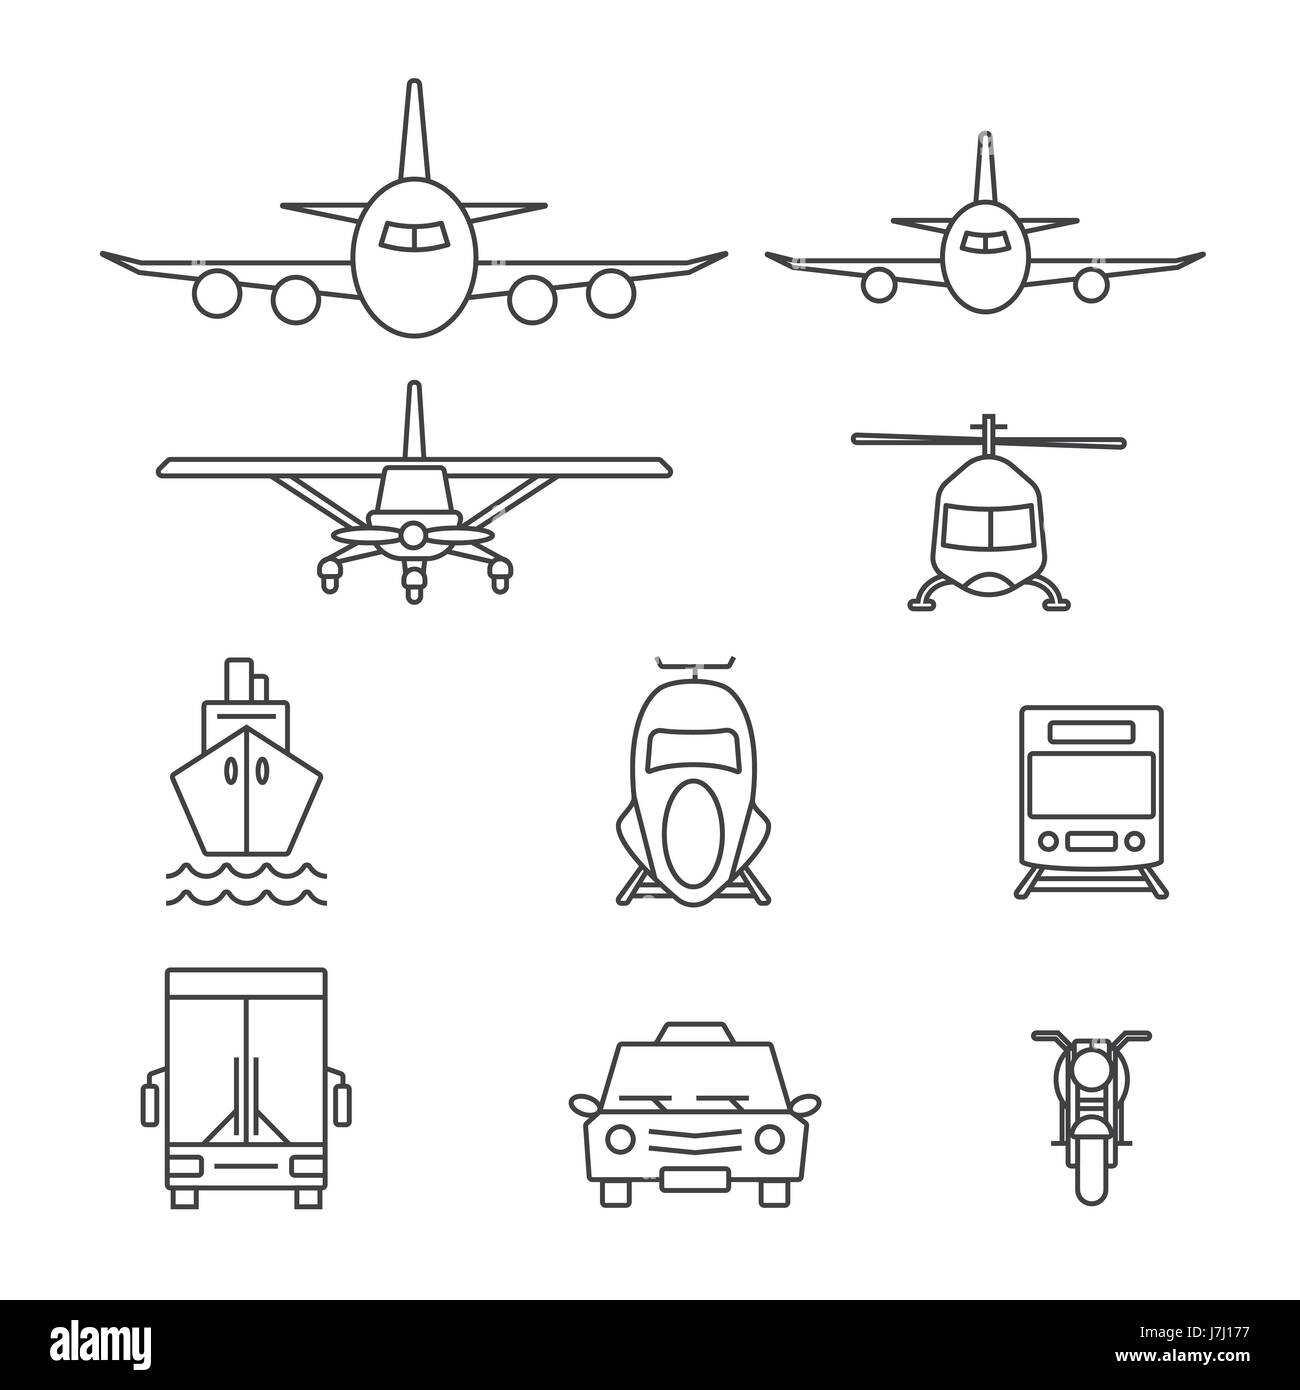 Vehicle icon sets. Line icons. Stock Vector